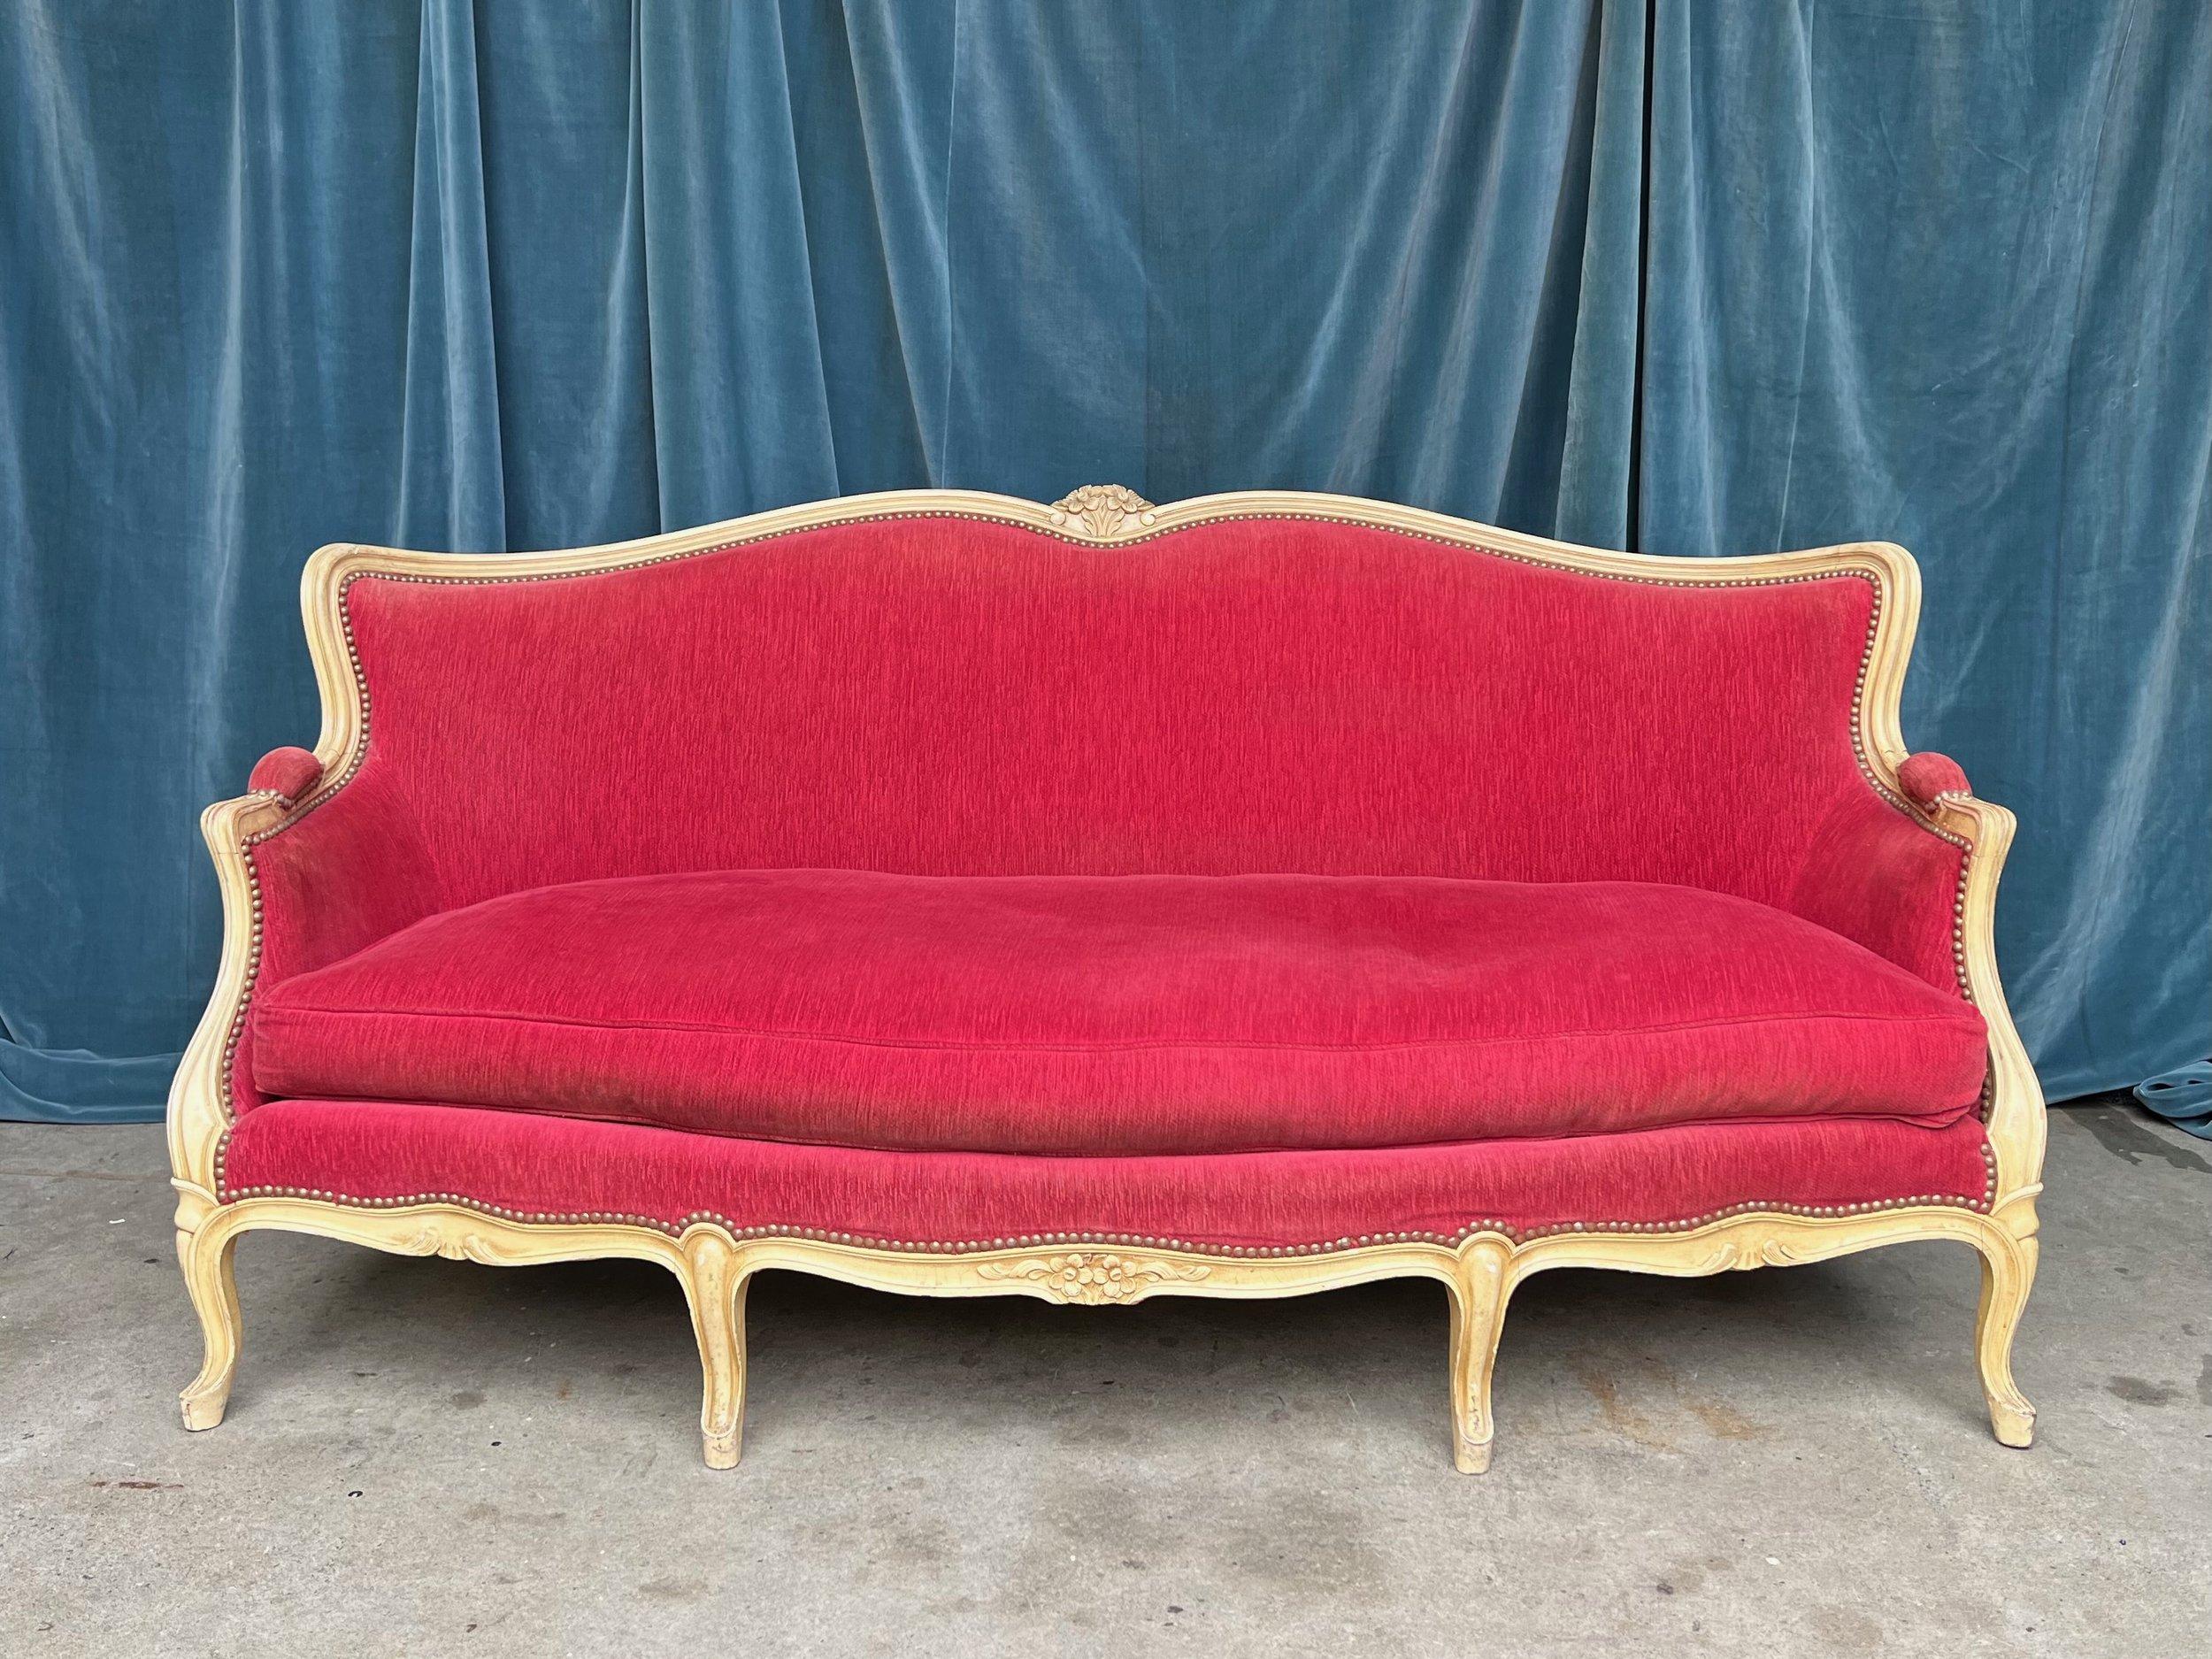 A stunning French 1920s Louis XV style settee upholstered in a rich red velvet upholstery with a creamy painted wood frame. The brass nailhead detailing adds an extra touch of sophistication and refinement. The settee is in good vintage condition,